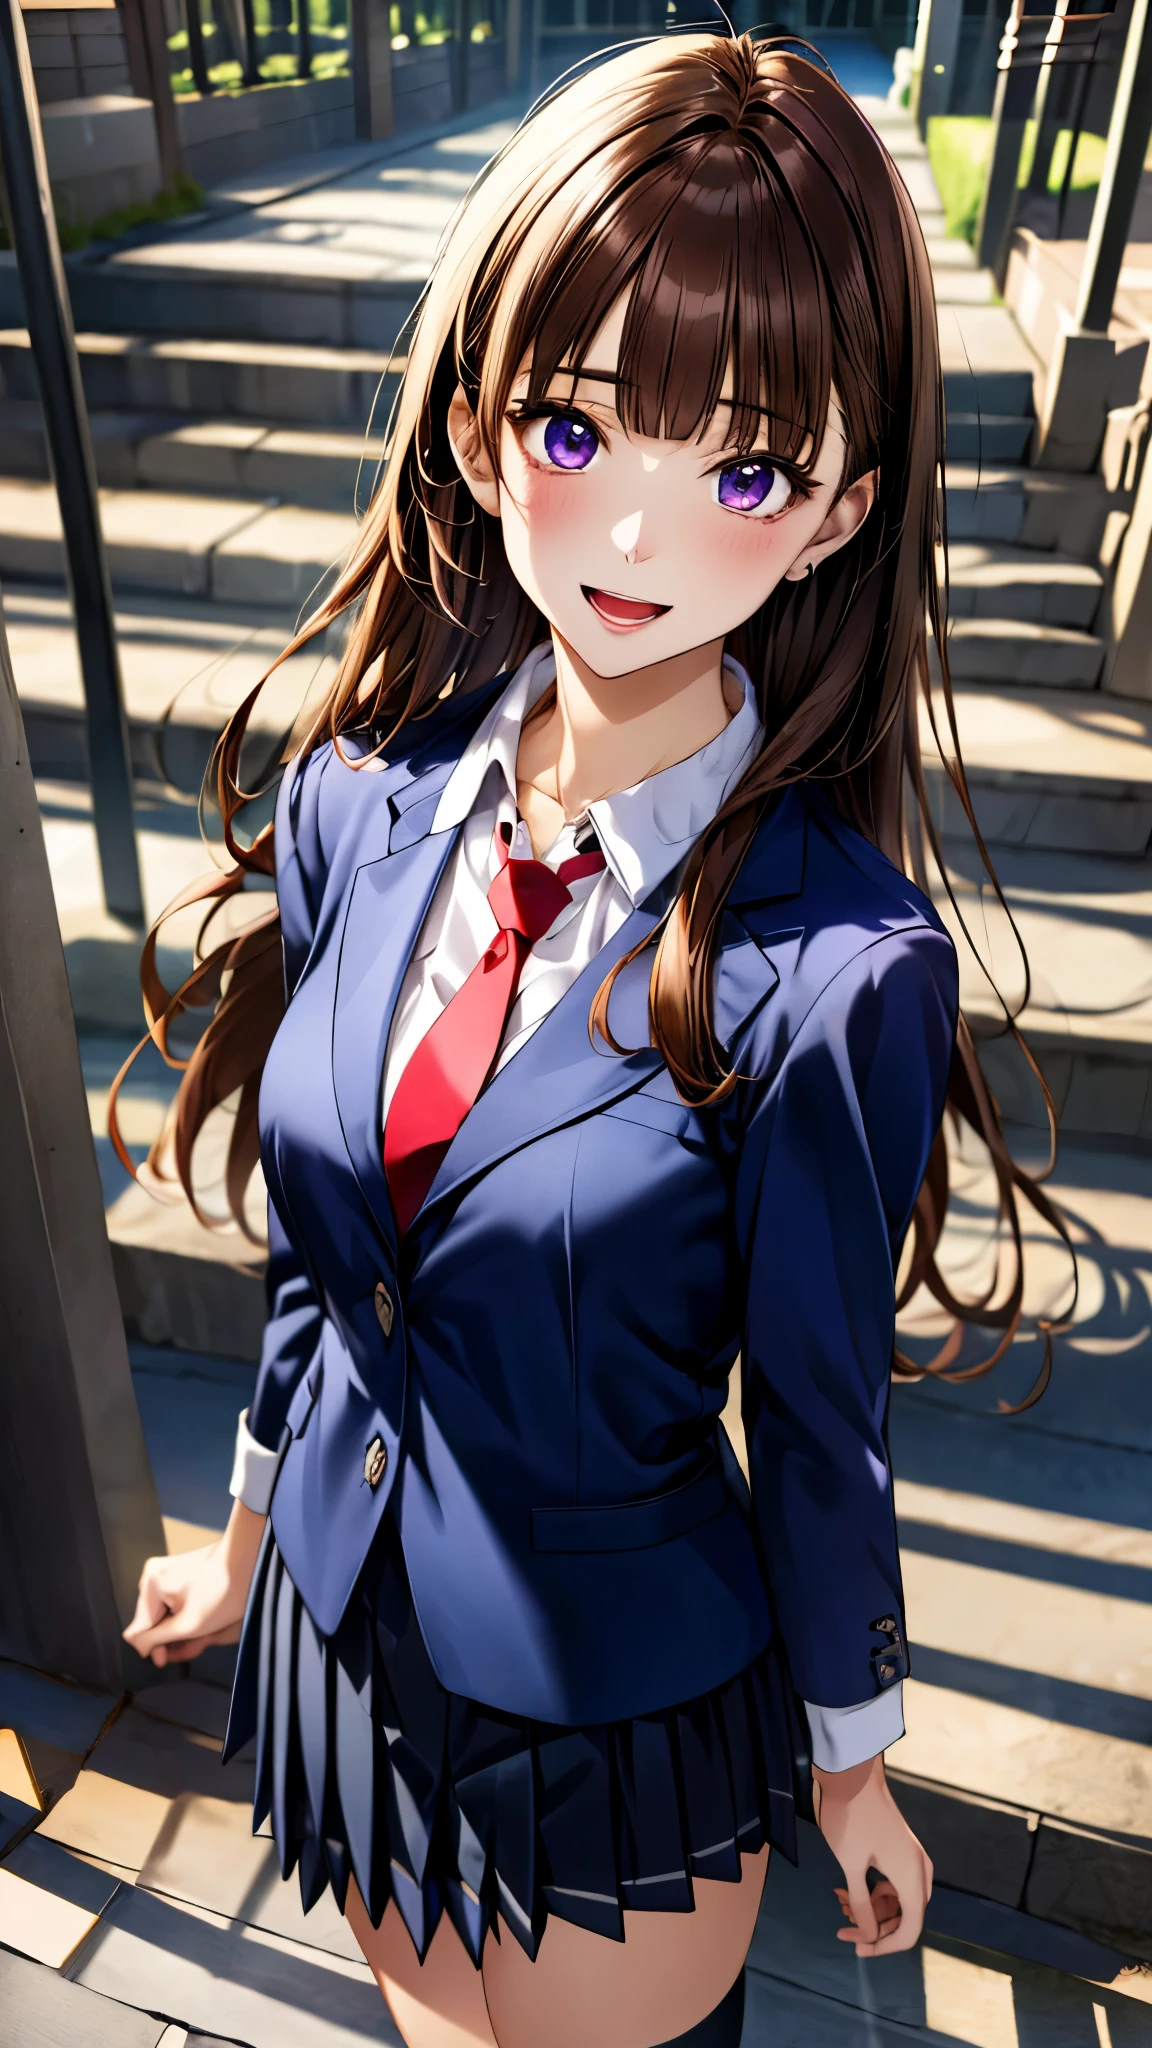 (masterpiece:1.3, top-quality, ultra high res, ultra detailed), (realistic, photorealistic:1.4), beautiful illustration, perfect lighting, natural lighting, colorful, depth of fields, 
beautiful detailed hair, beautiful detailed face, beautiful detailed eyes, beautiful clavicle, beautiful body, beautiful chest, beautiful thigh, beautiful legs, beautiful fingers, 
looking at viewer, 1 girl, japanese, high school girl, perfect face, (perfect anatomy, anatomically correct), cute and symmetrical face, babyface, , shiny skin, 
(long hair:1.5, straight hair:1.4, purple brown hair), blunt bangs, purple eyes, long eye lasher, (medium breasts), slender, 
(((navy) blazer, collared white shirt, navy pleated skirt, dark red tie)), navy school socks, , 
(beautiful scenery), evening, (school gate), standing, call on phone, (seductive smile, open mouth), 